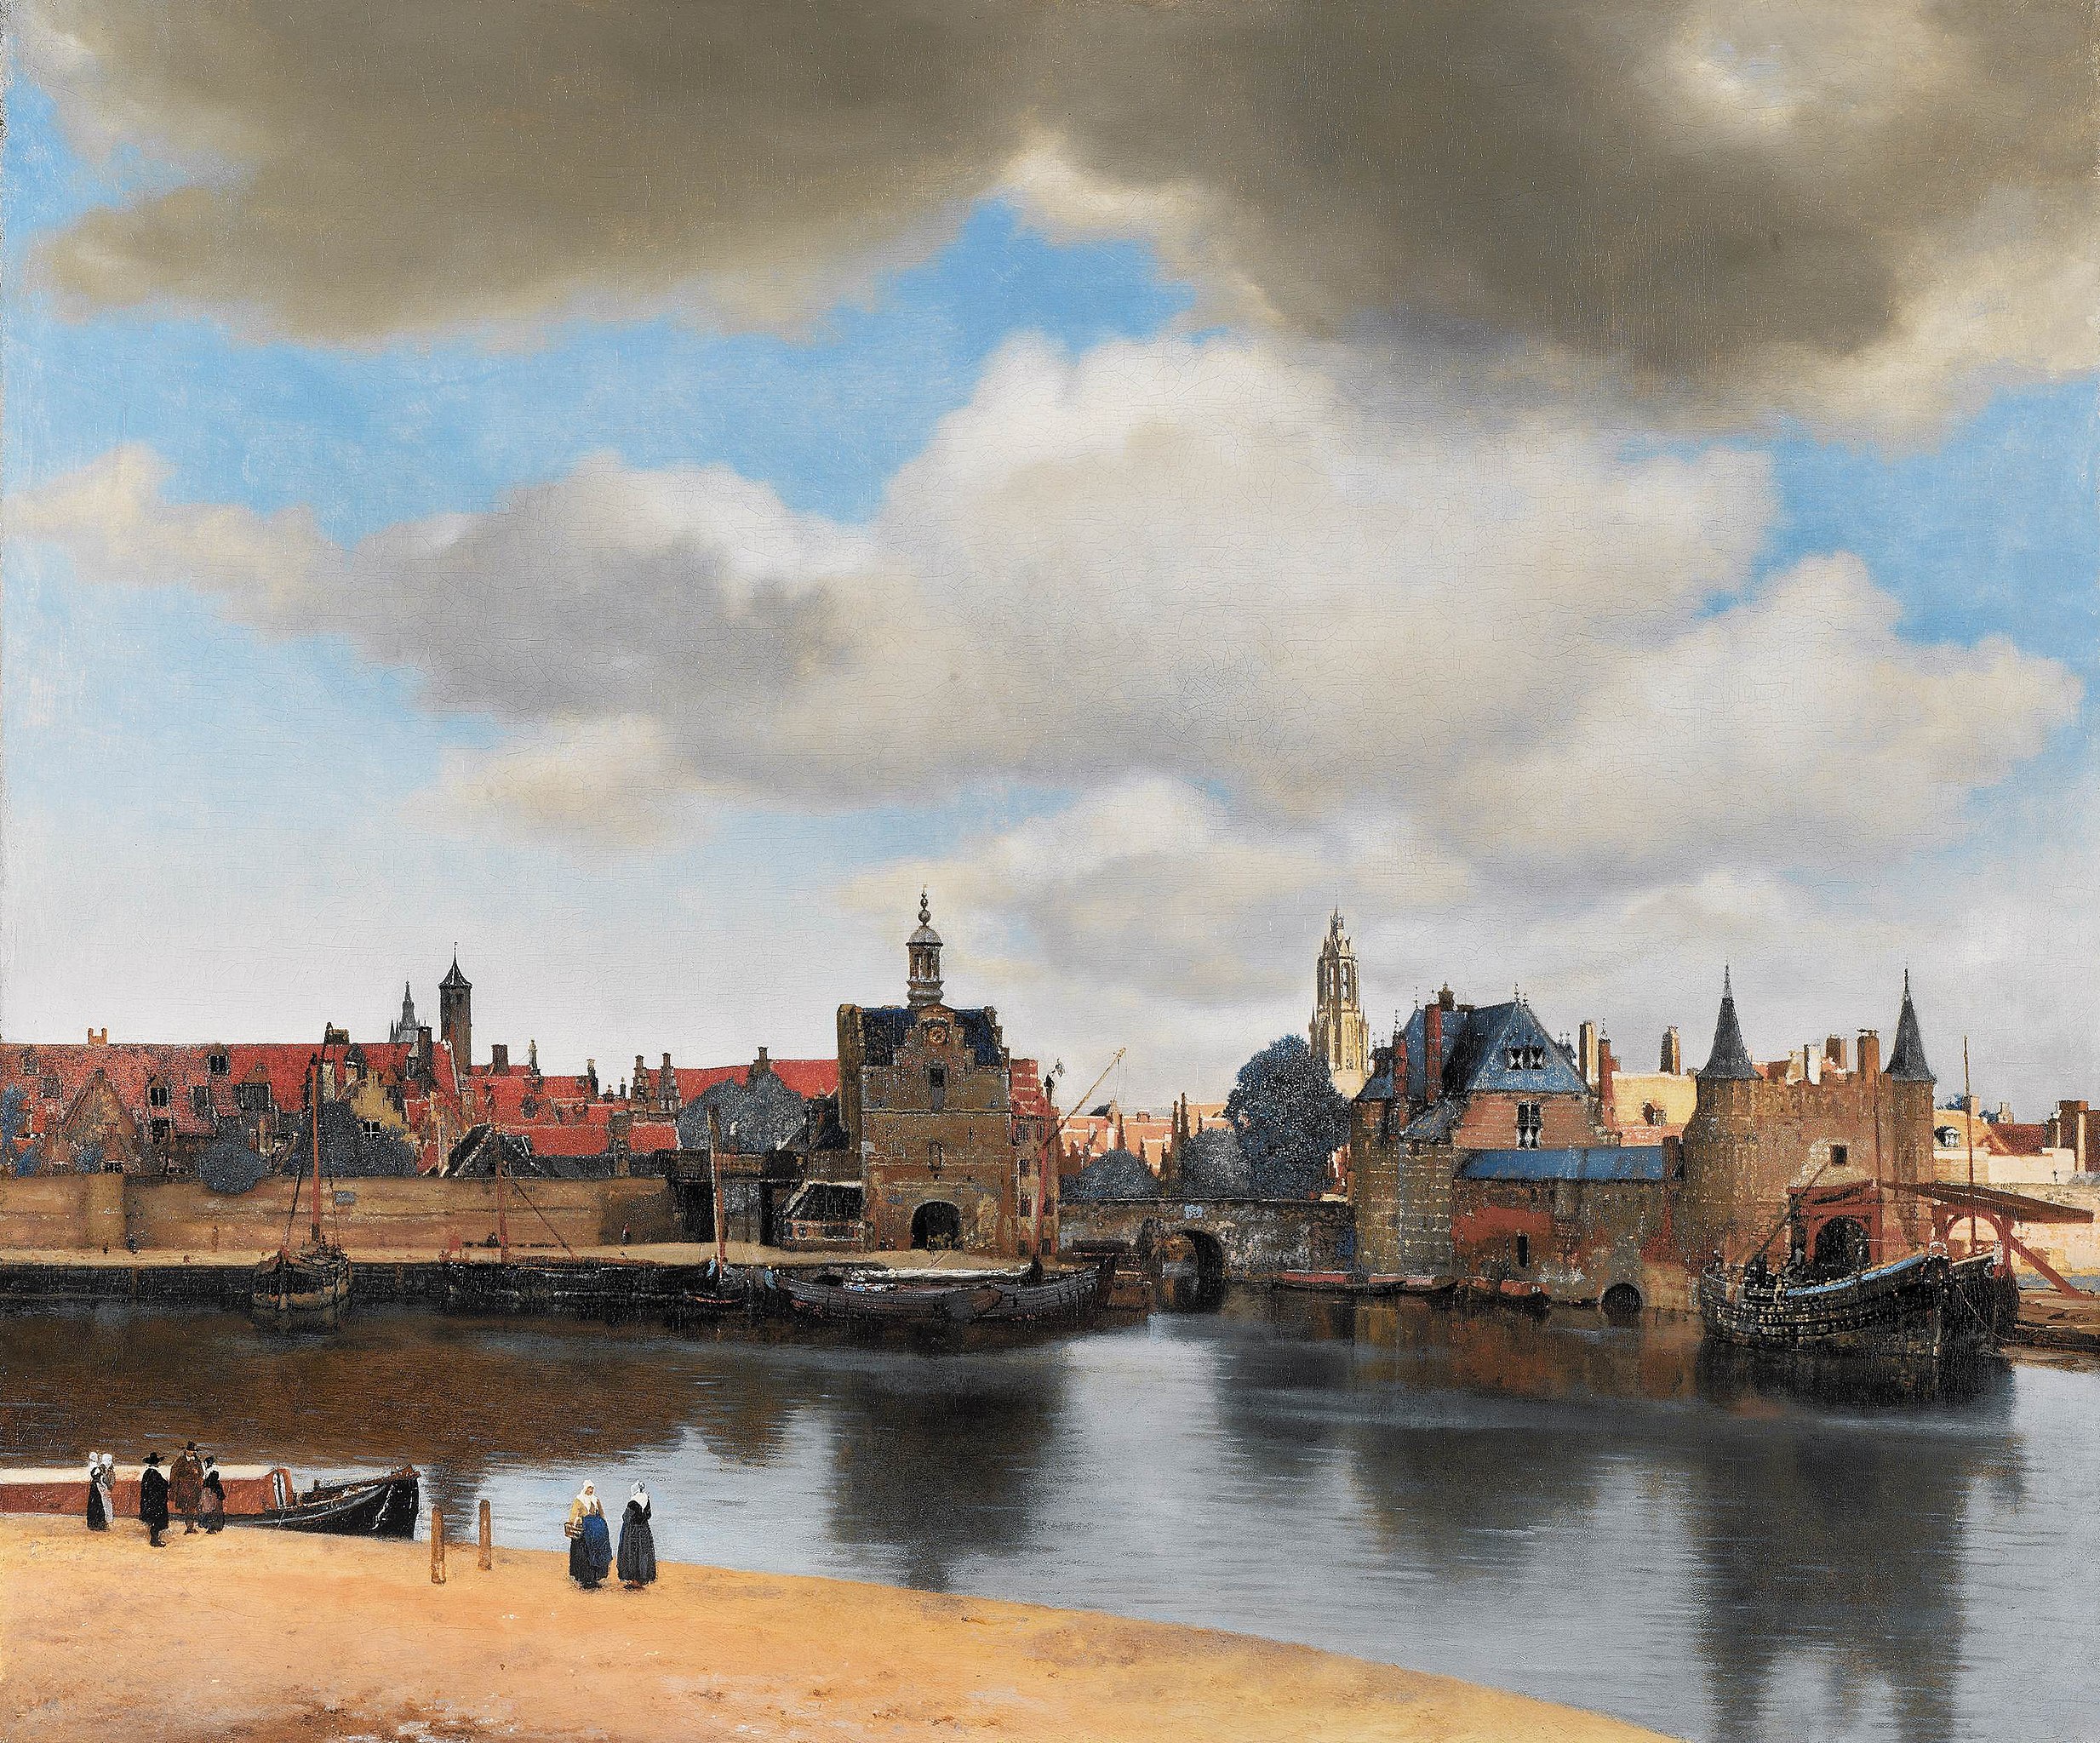 A Golden Age painting of a city by the water.